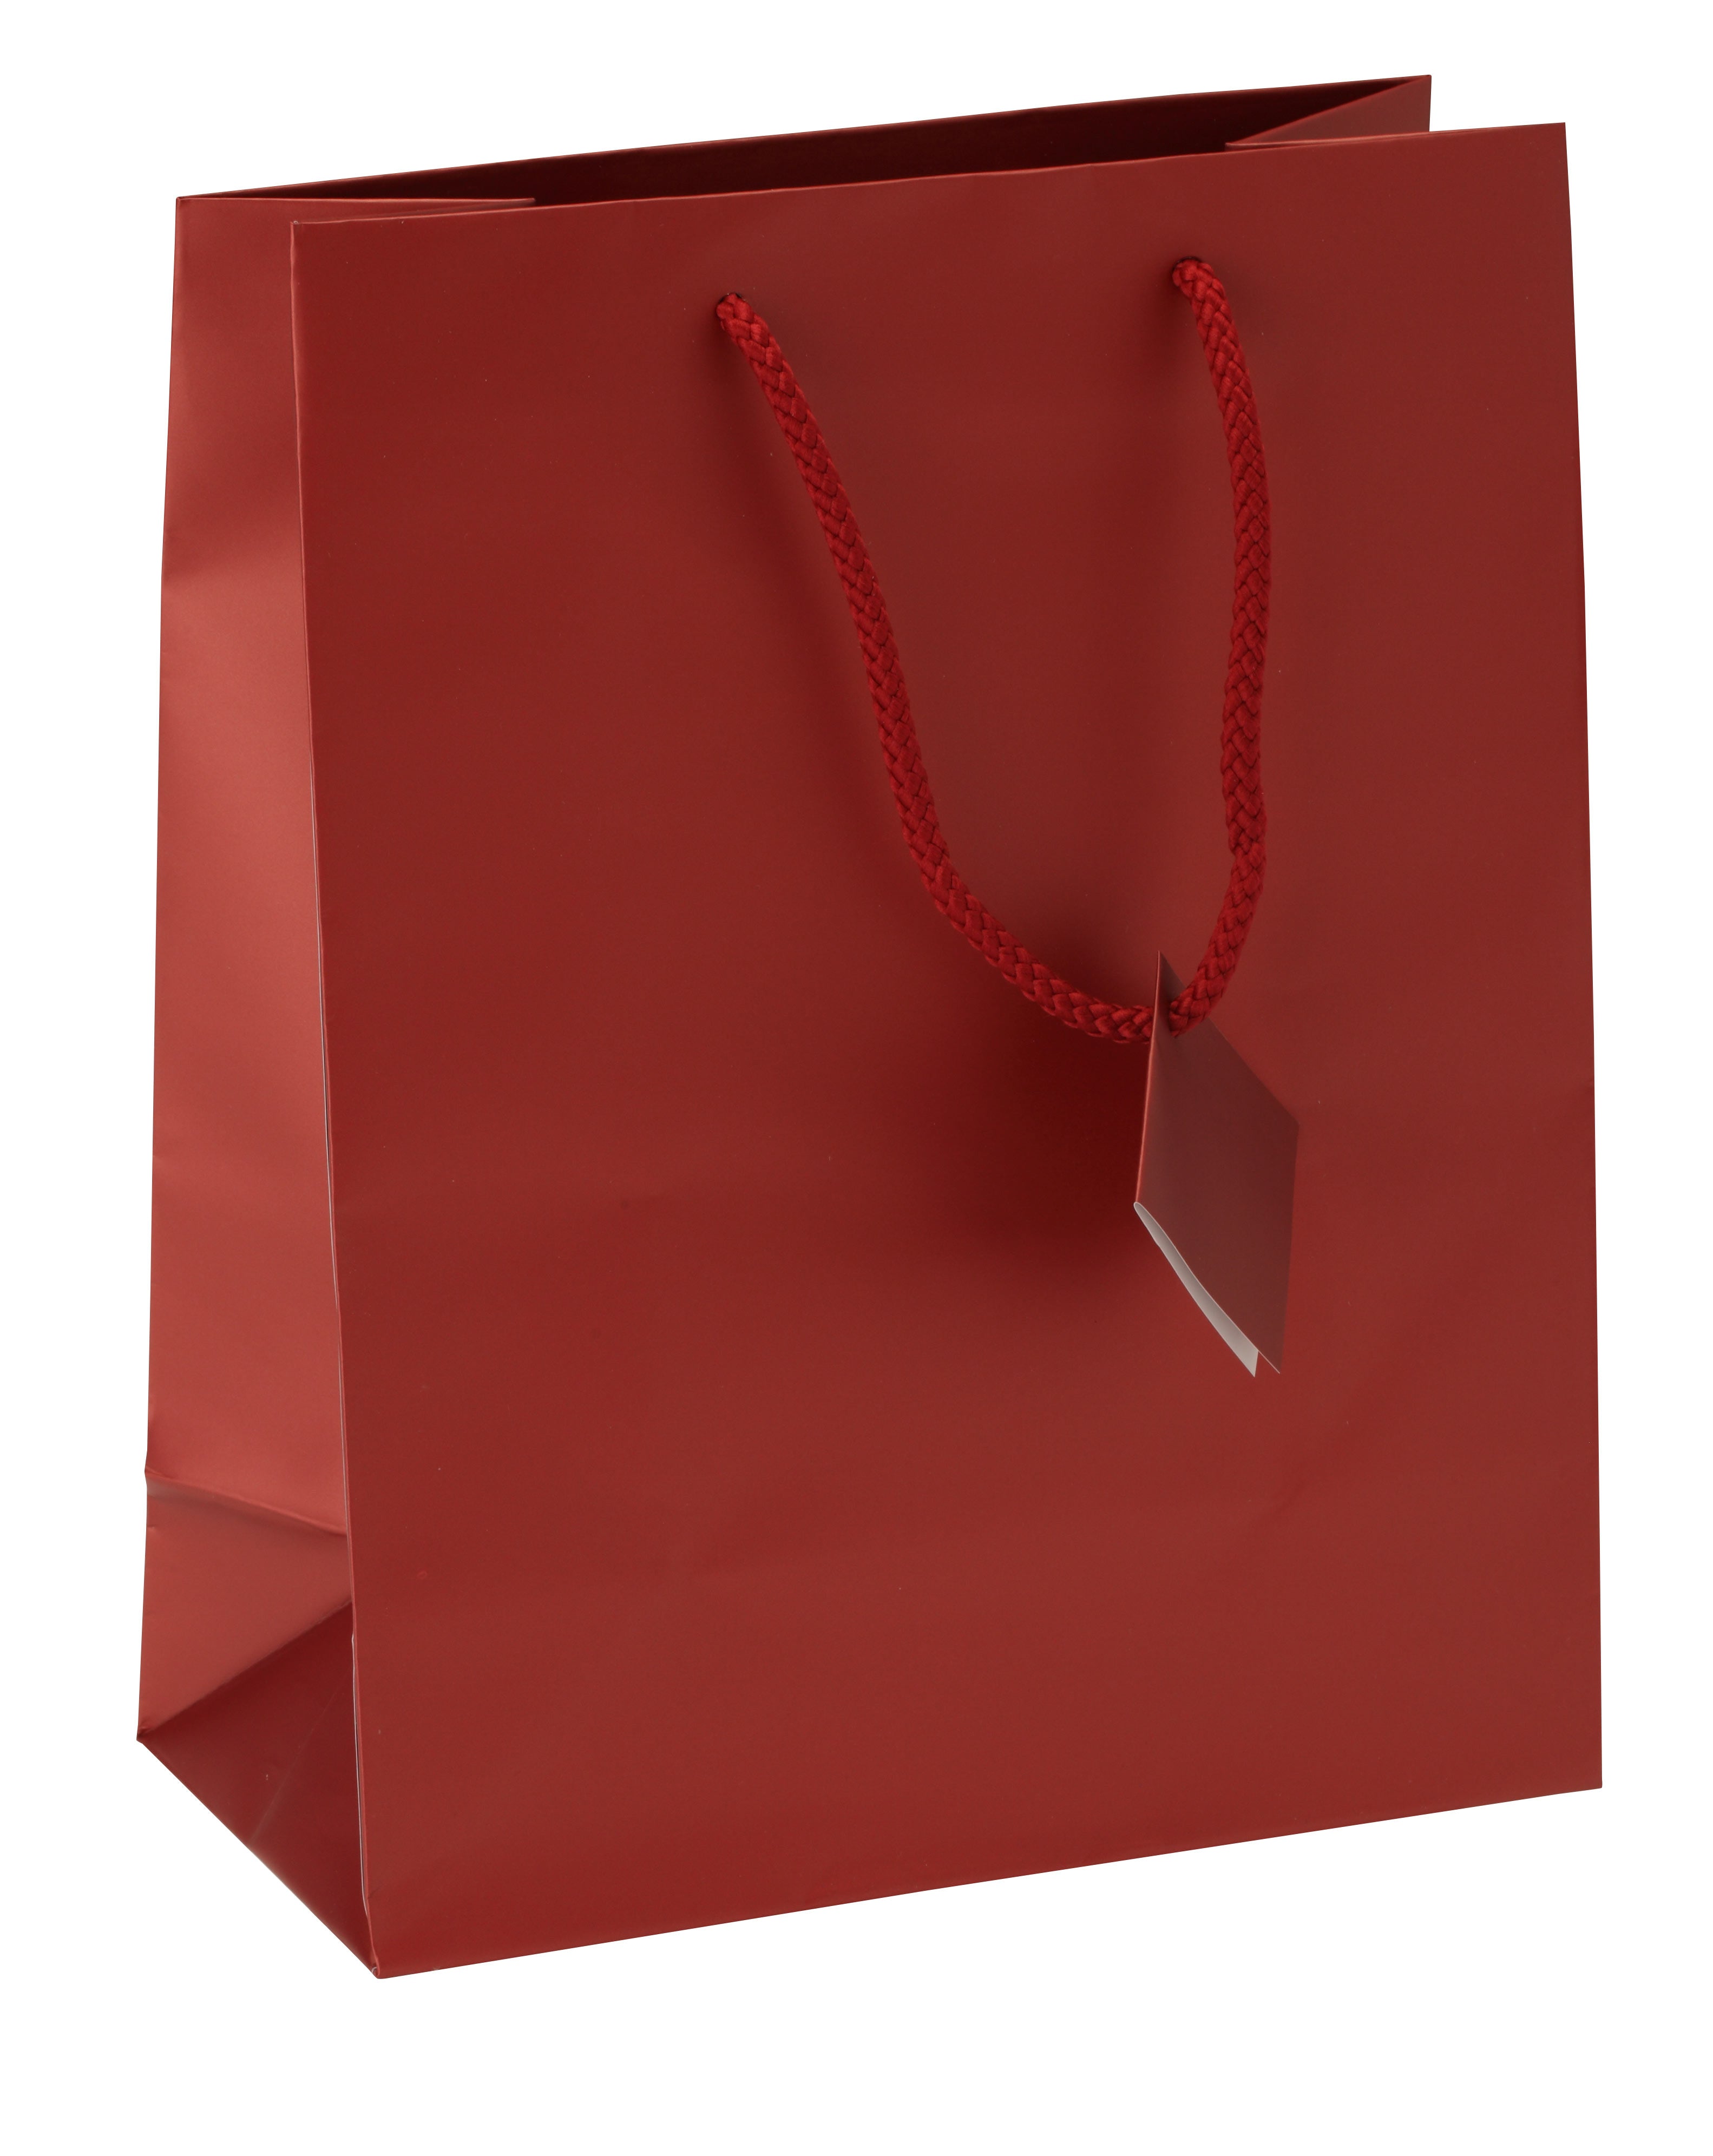 Satin-Finish Tote-Style Gift Bags in Brick Frost